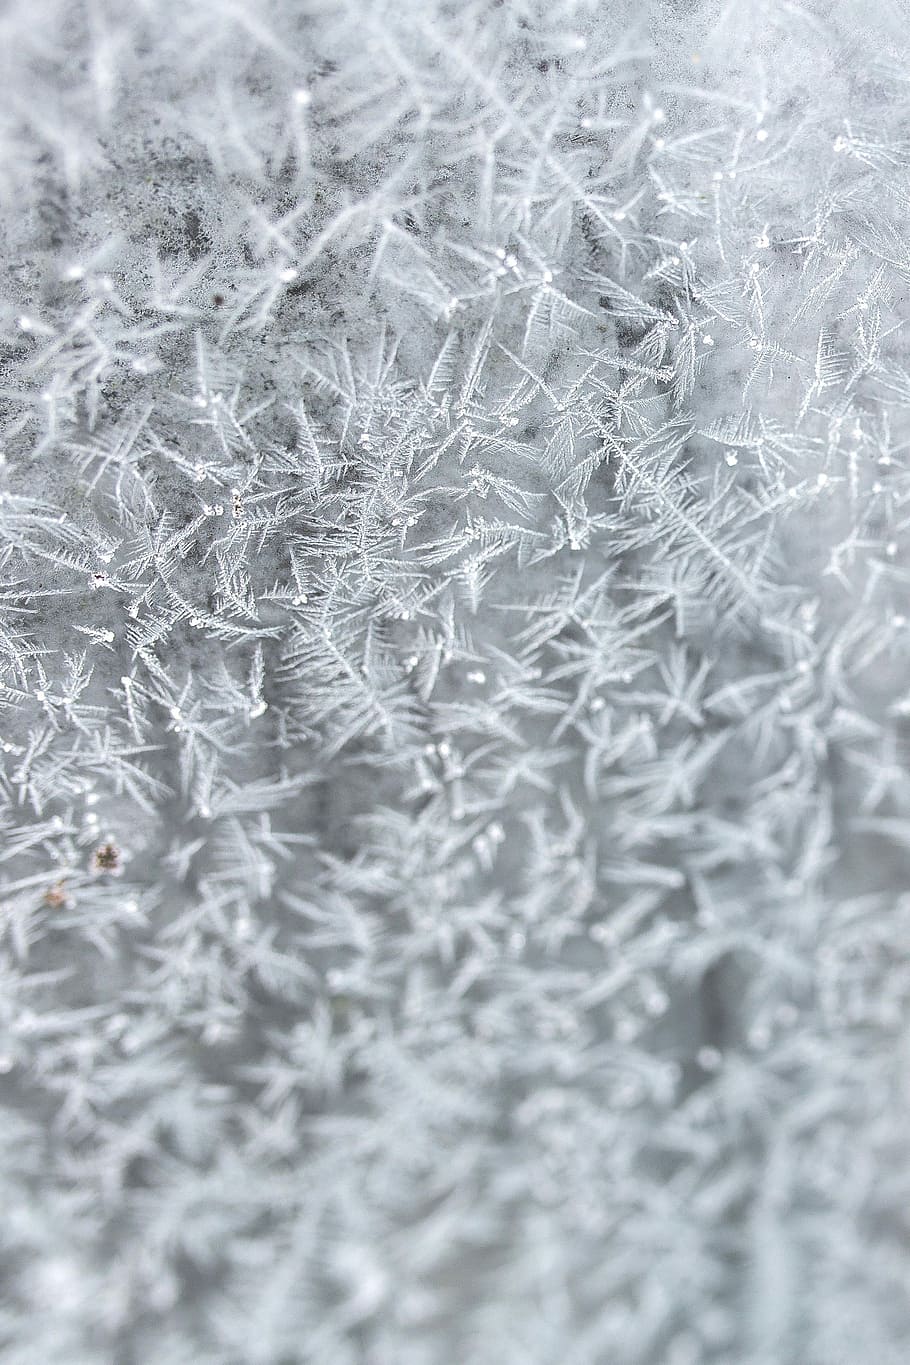 Frosty background, winter, cold, ice, backgrounds, pattern, close-up